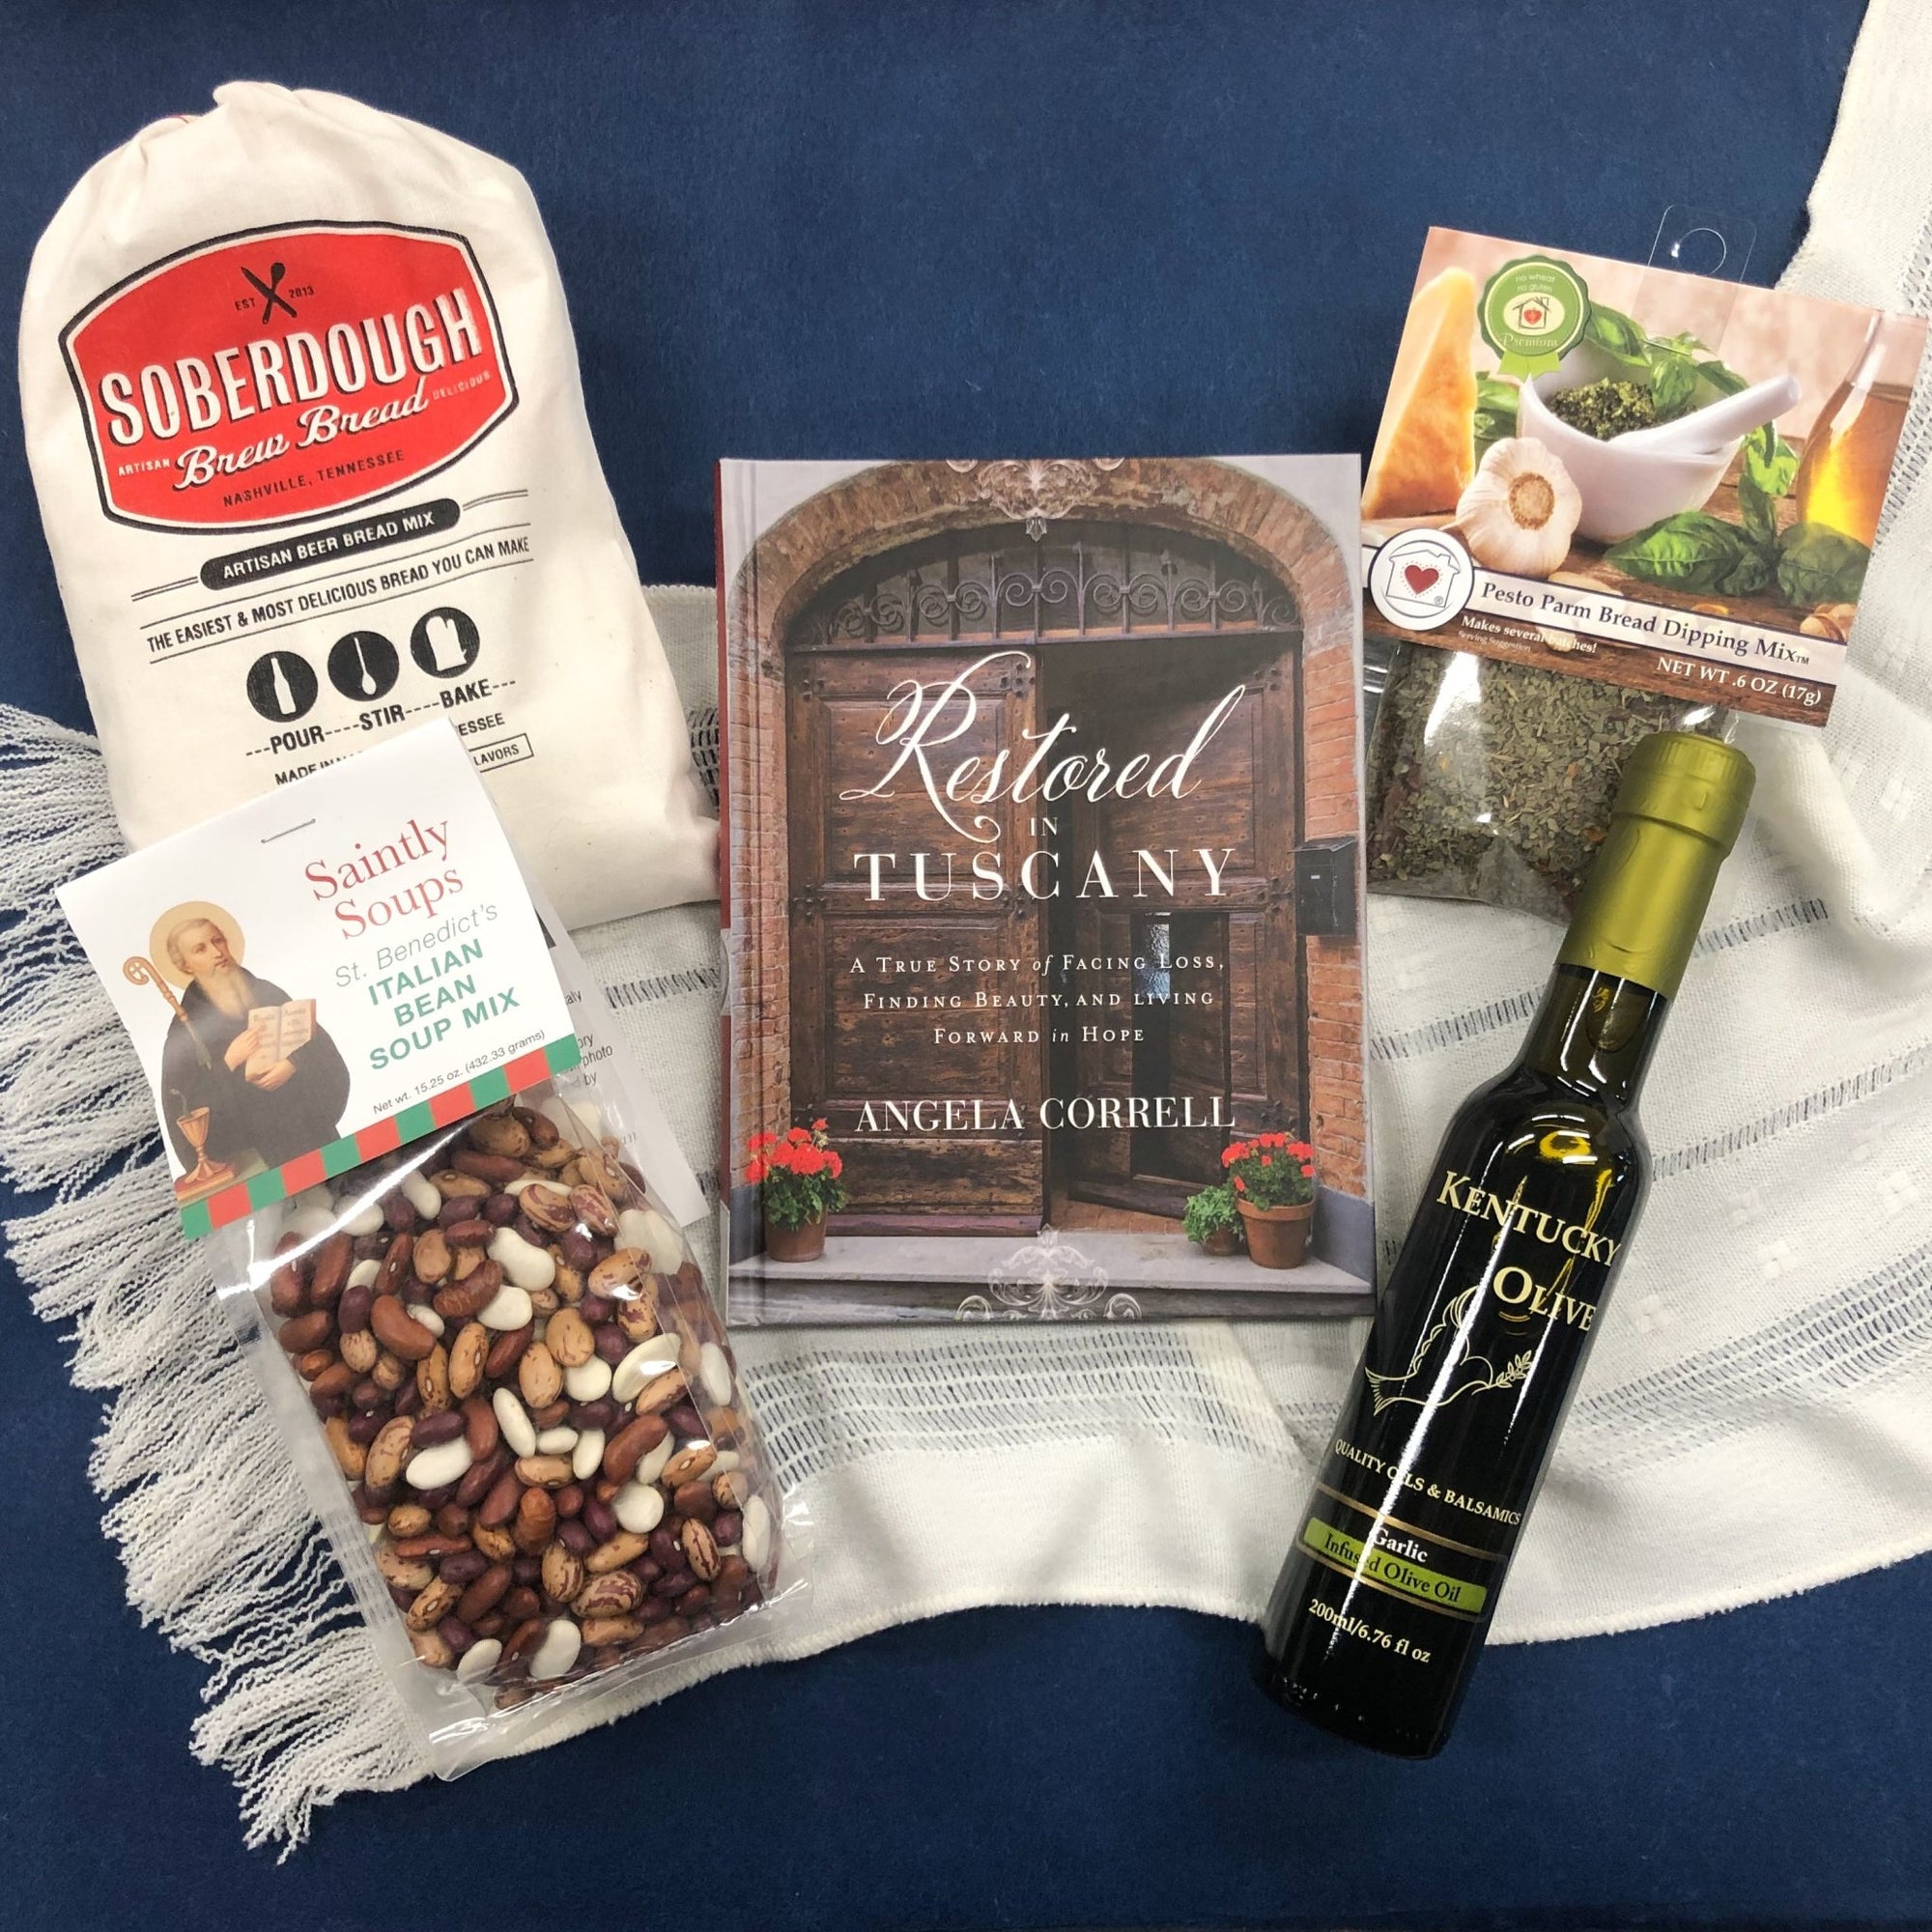 Escape To Italy - Kentucky Soaps & Such